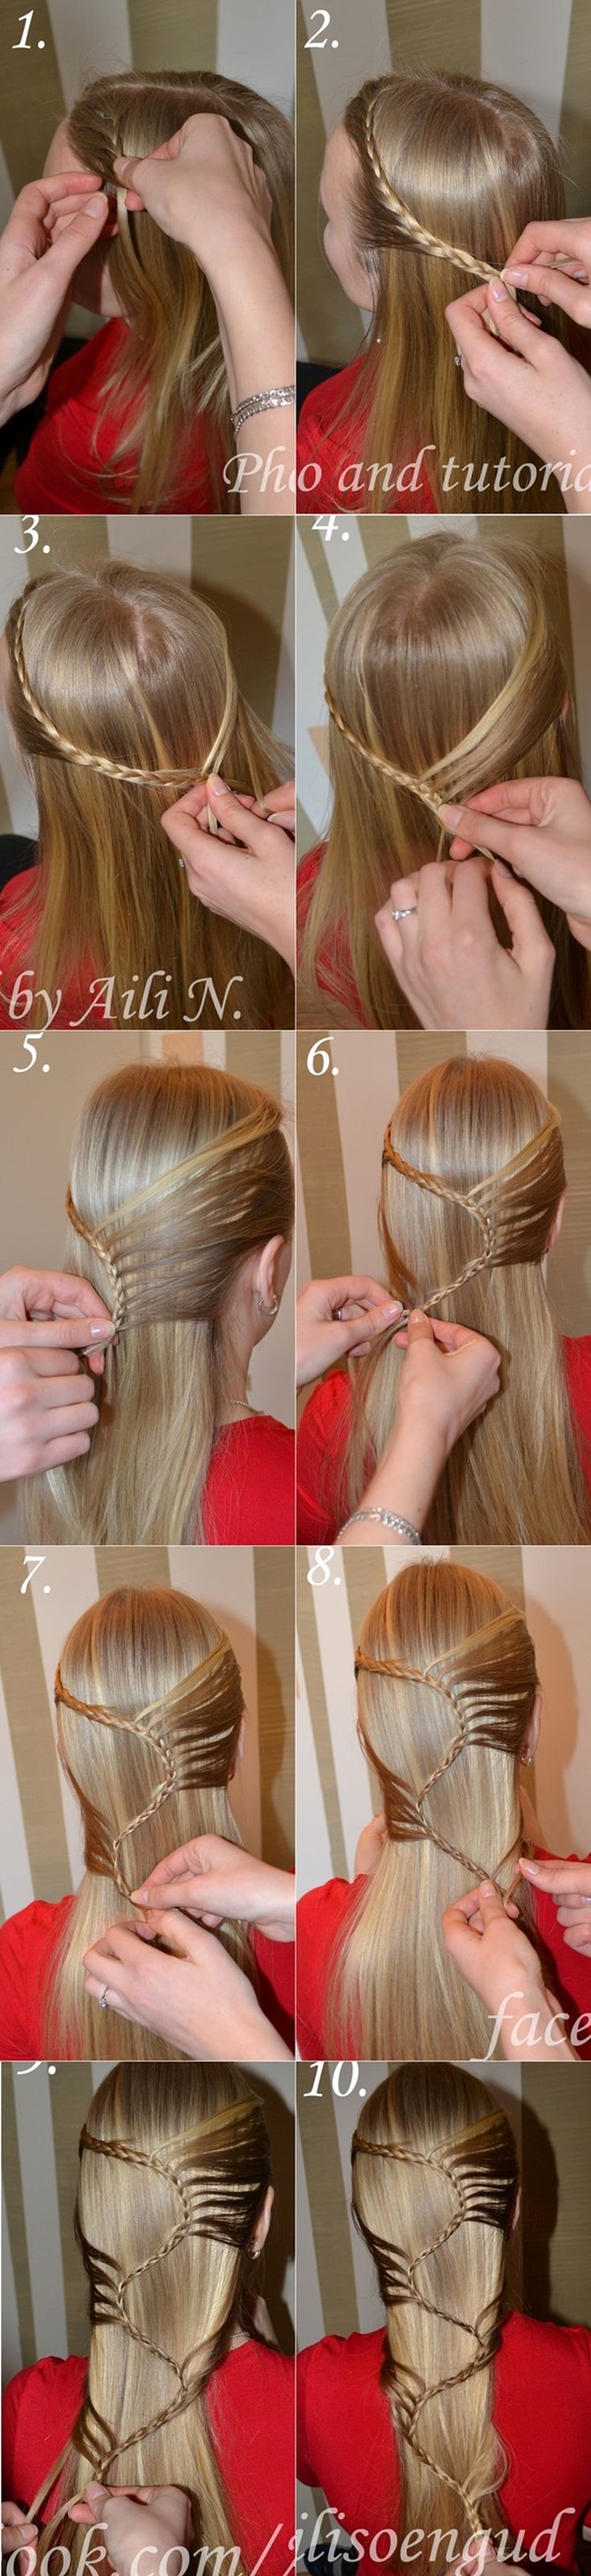 Simple Five Minute Hairstyles (23)